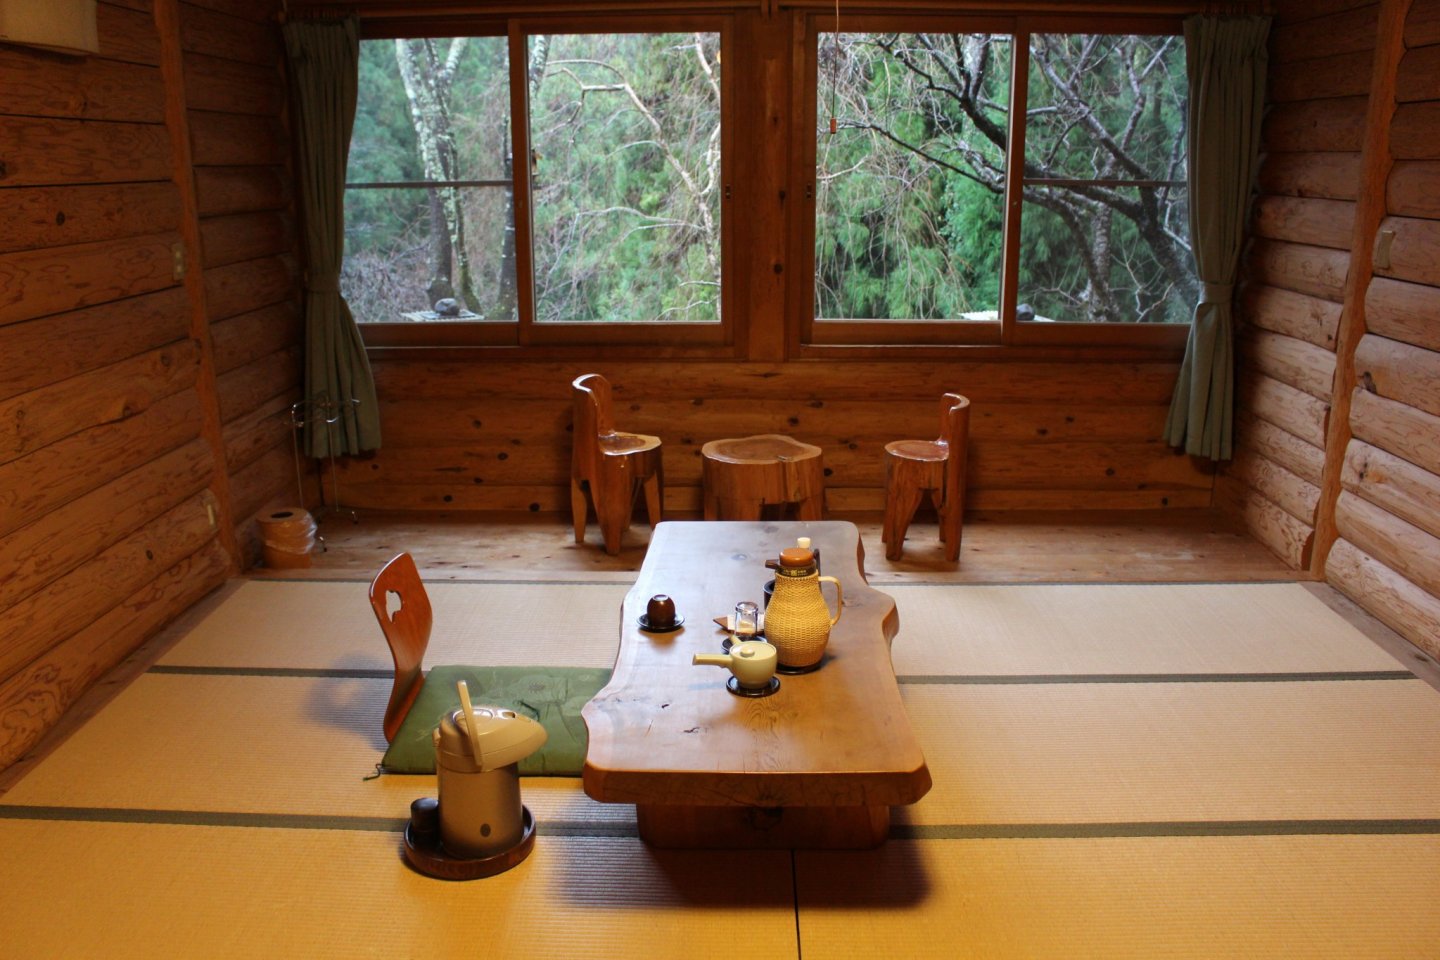 A room in the Ryokan Kato's Log House section